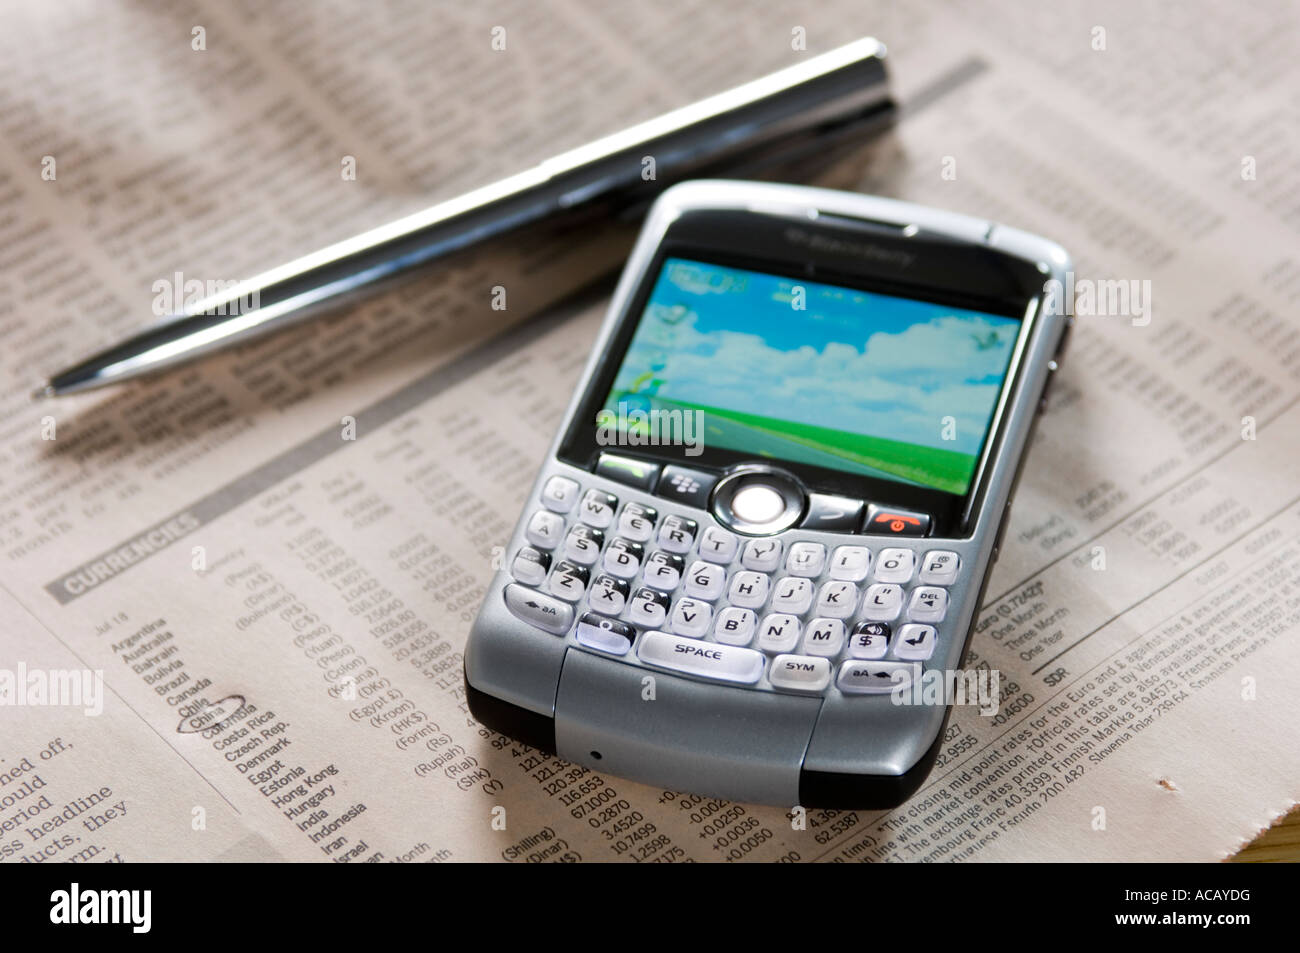 a blackberry mobile phone Stock Photo